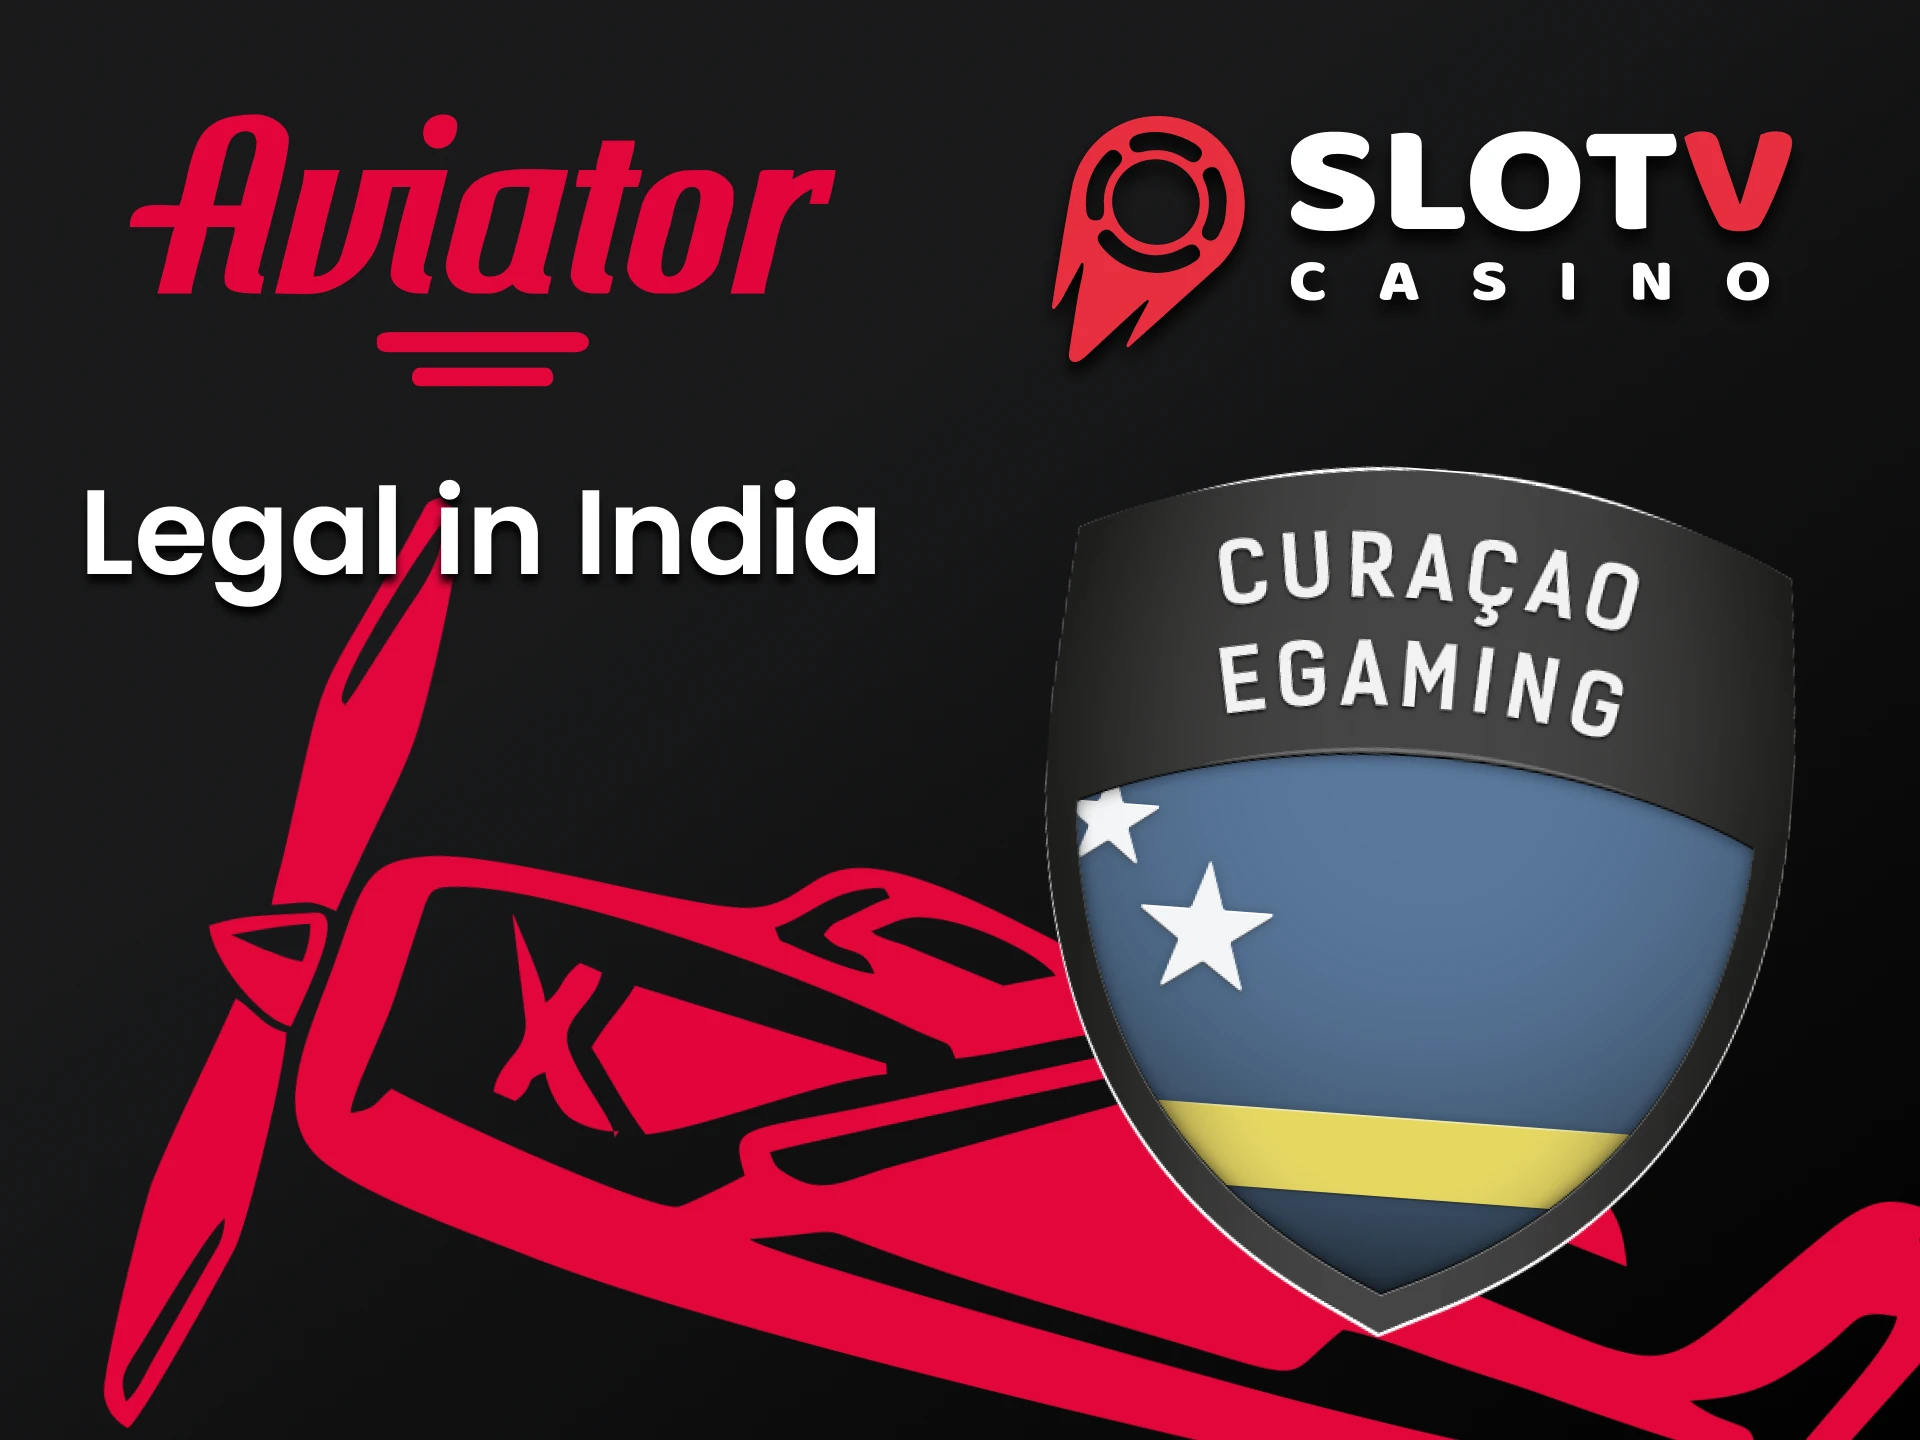 SlotV is legal for Indian players.